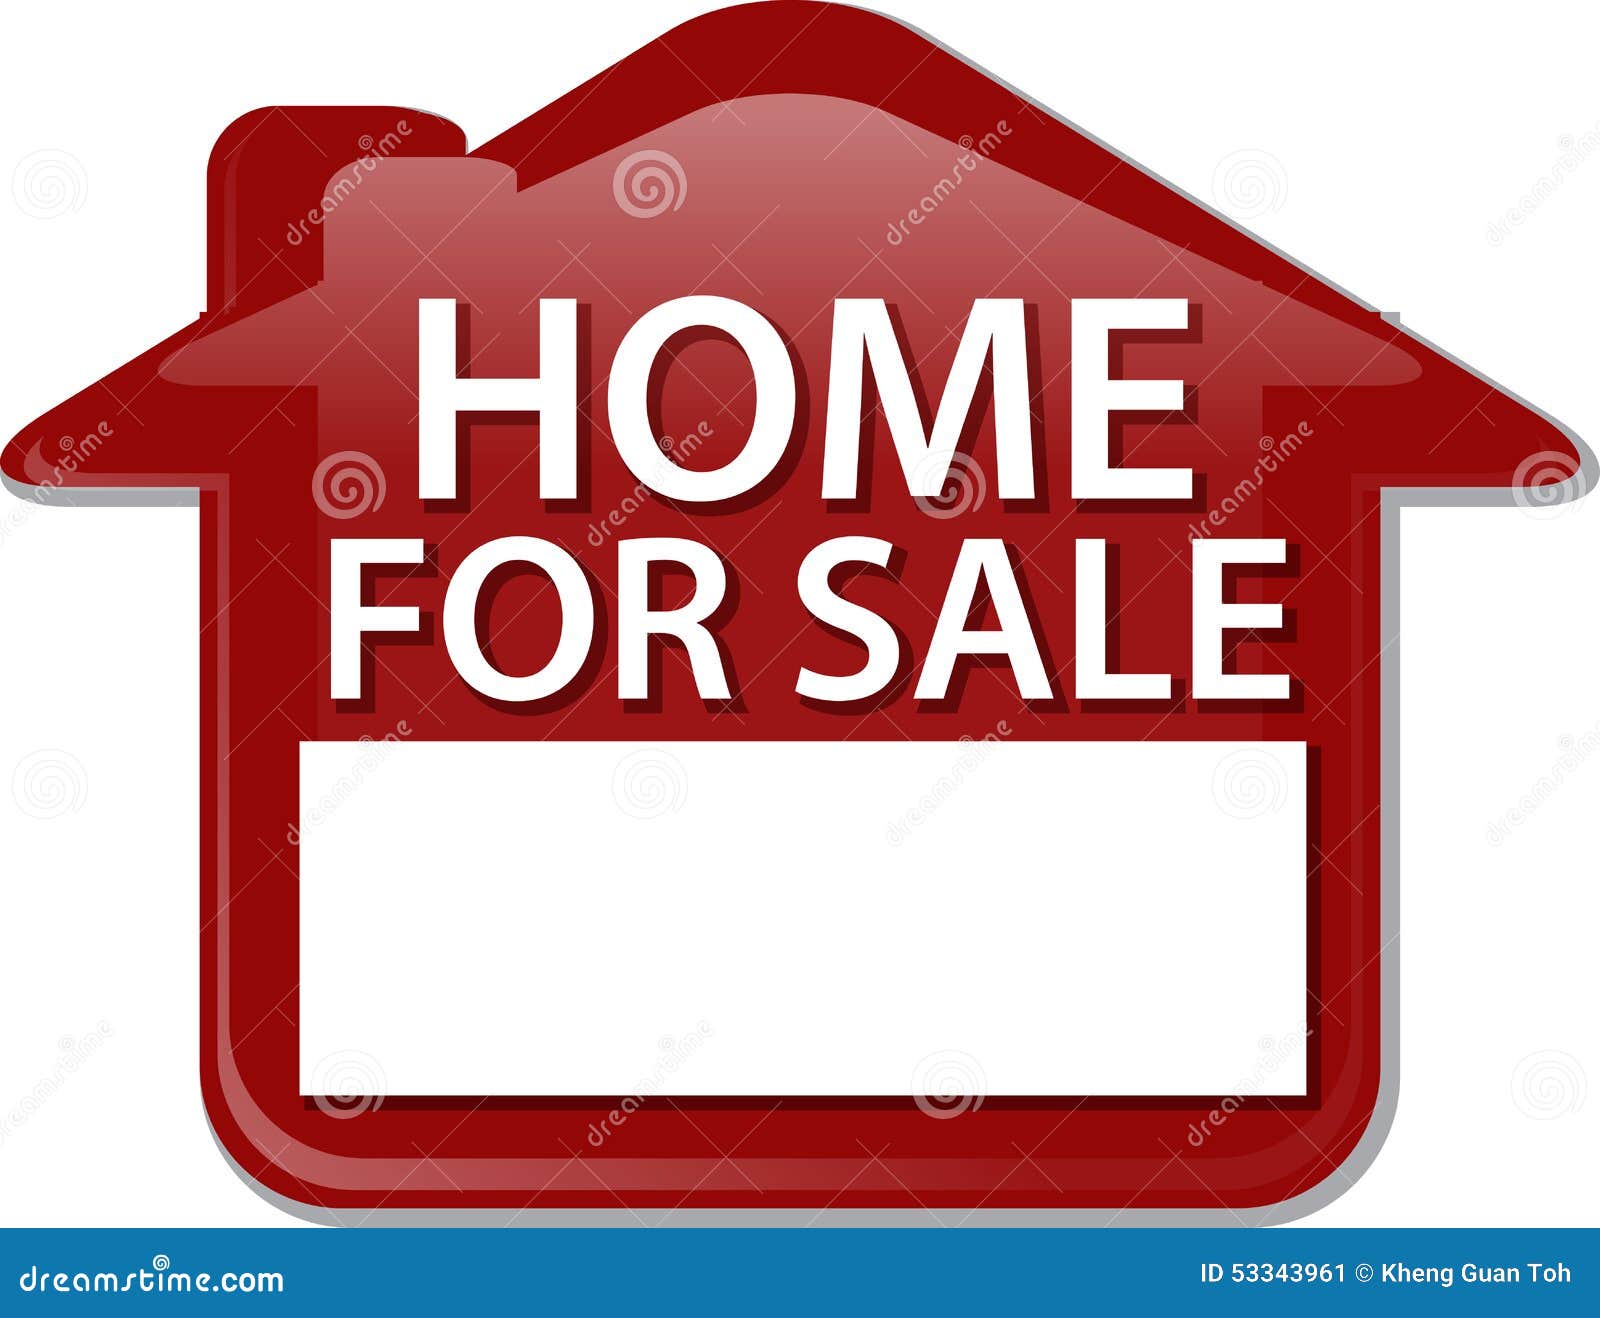 clipart home for sale - photo #47